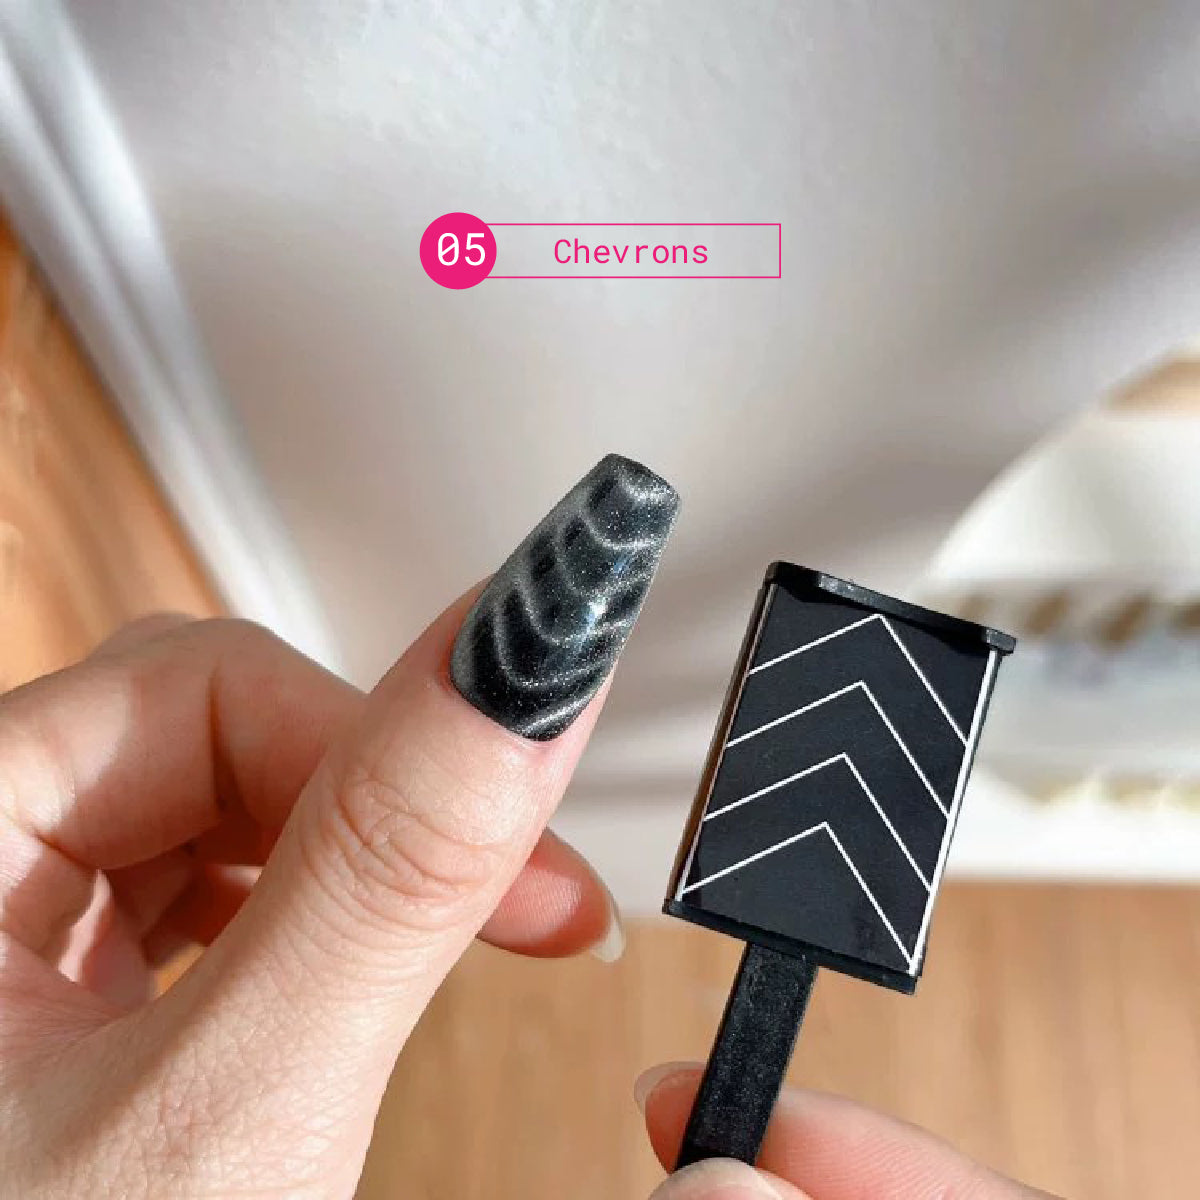 Nail Art Tools Patterned Magnet in Chevrons in N05